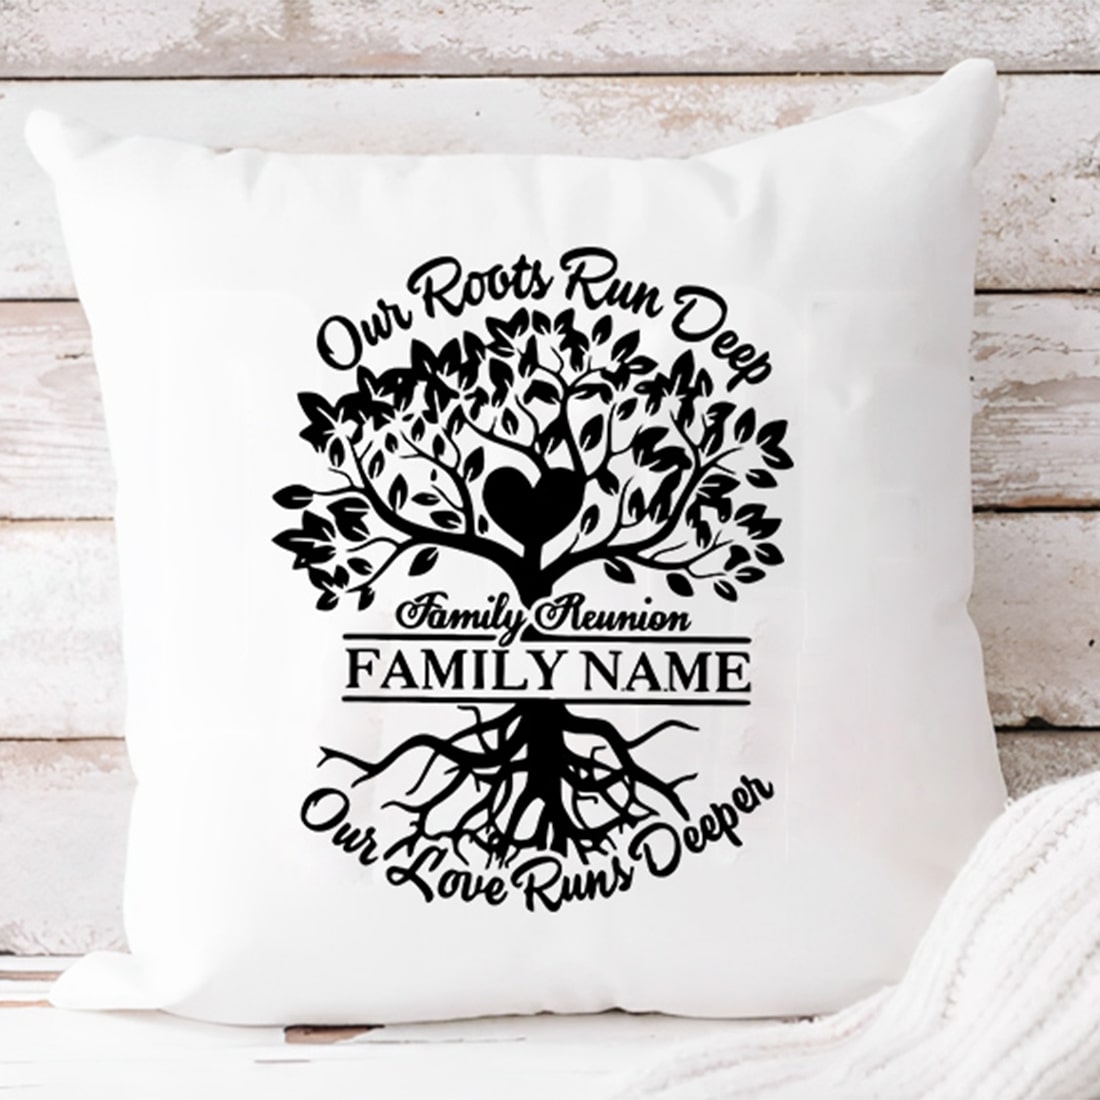 Class Reunion Merch & Gifts for Sale | Redbubble